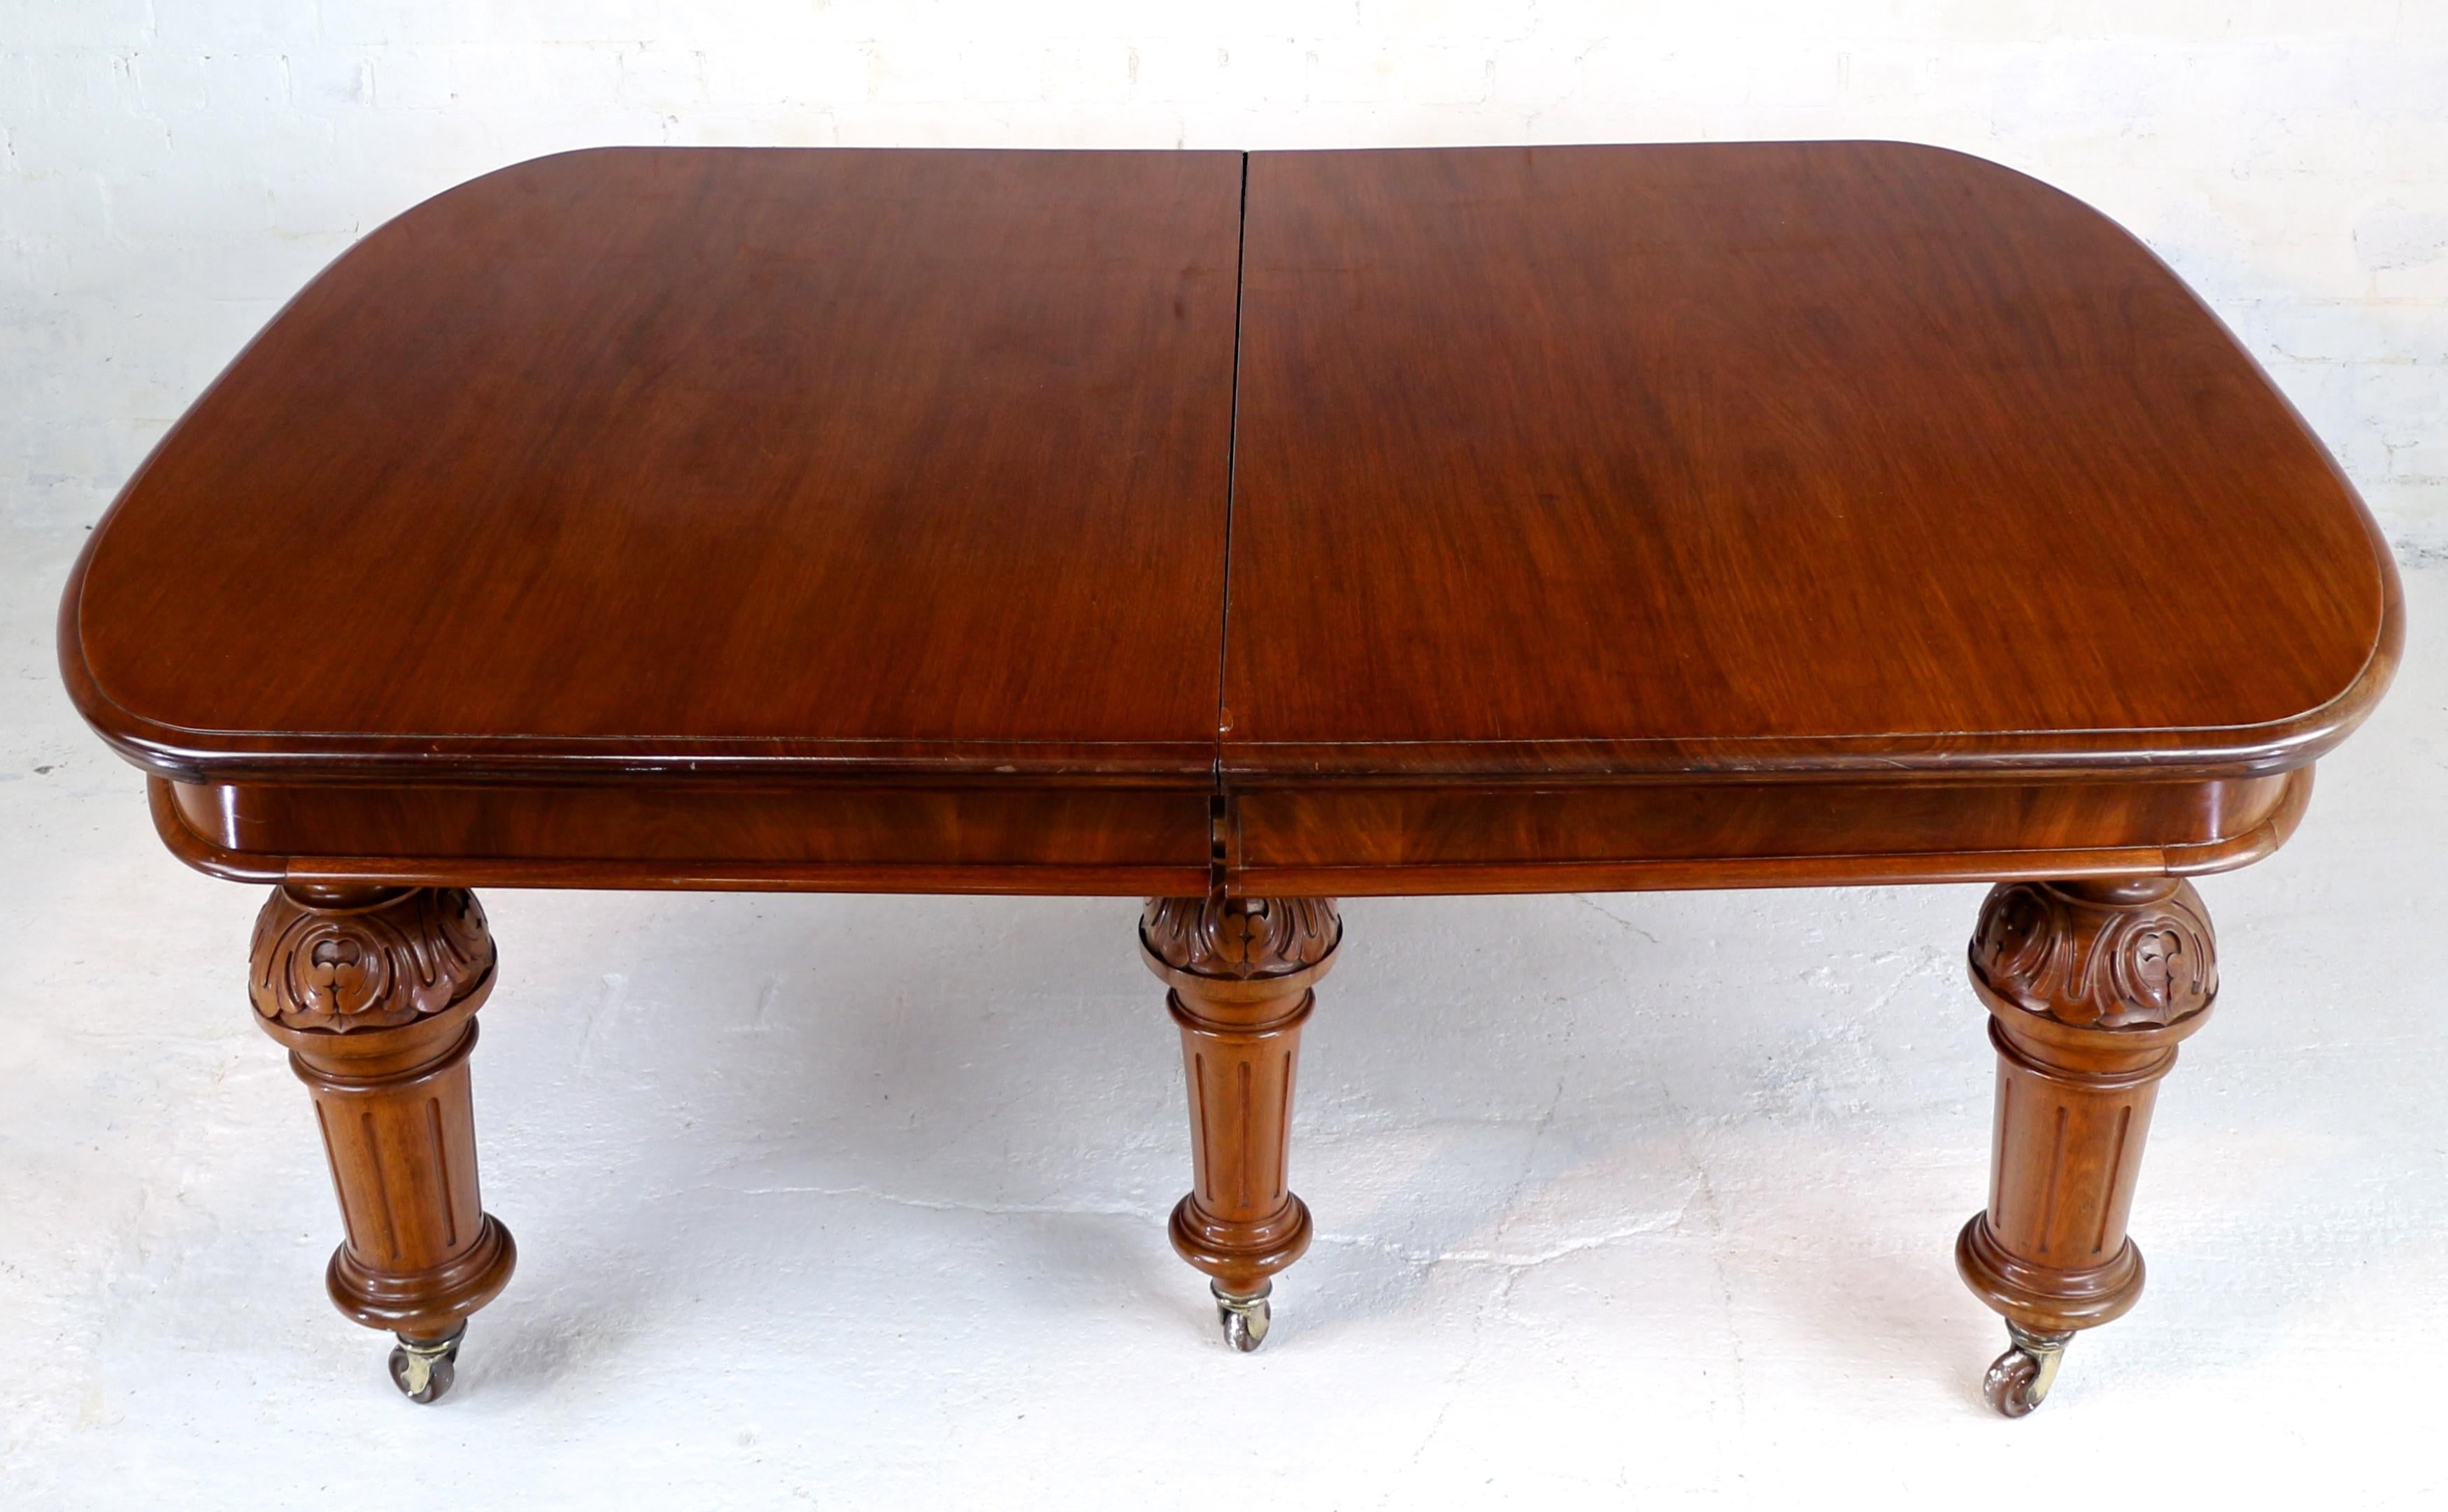 Antique English Victorian Mahogany Extending Dining Table and 4 Leaves, Seats 16 For Sale 9